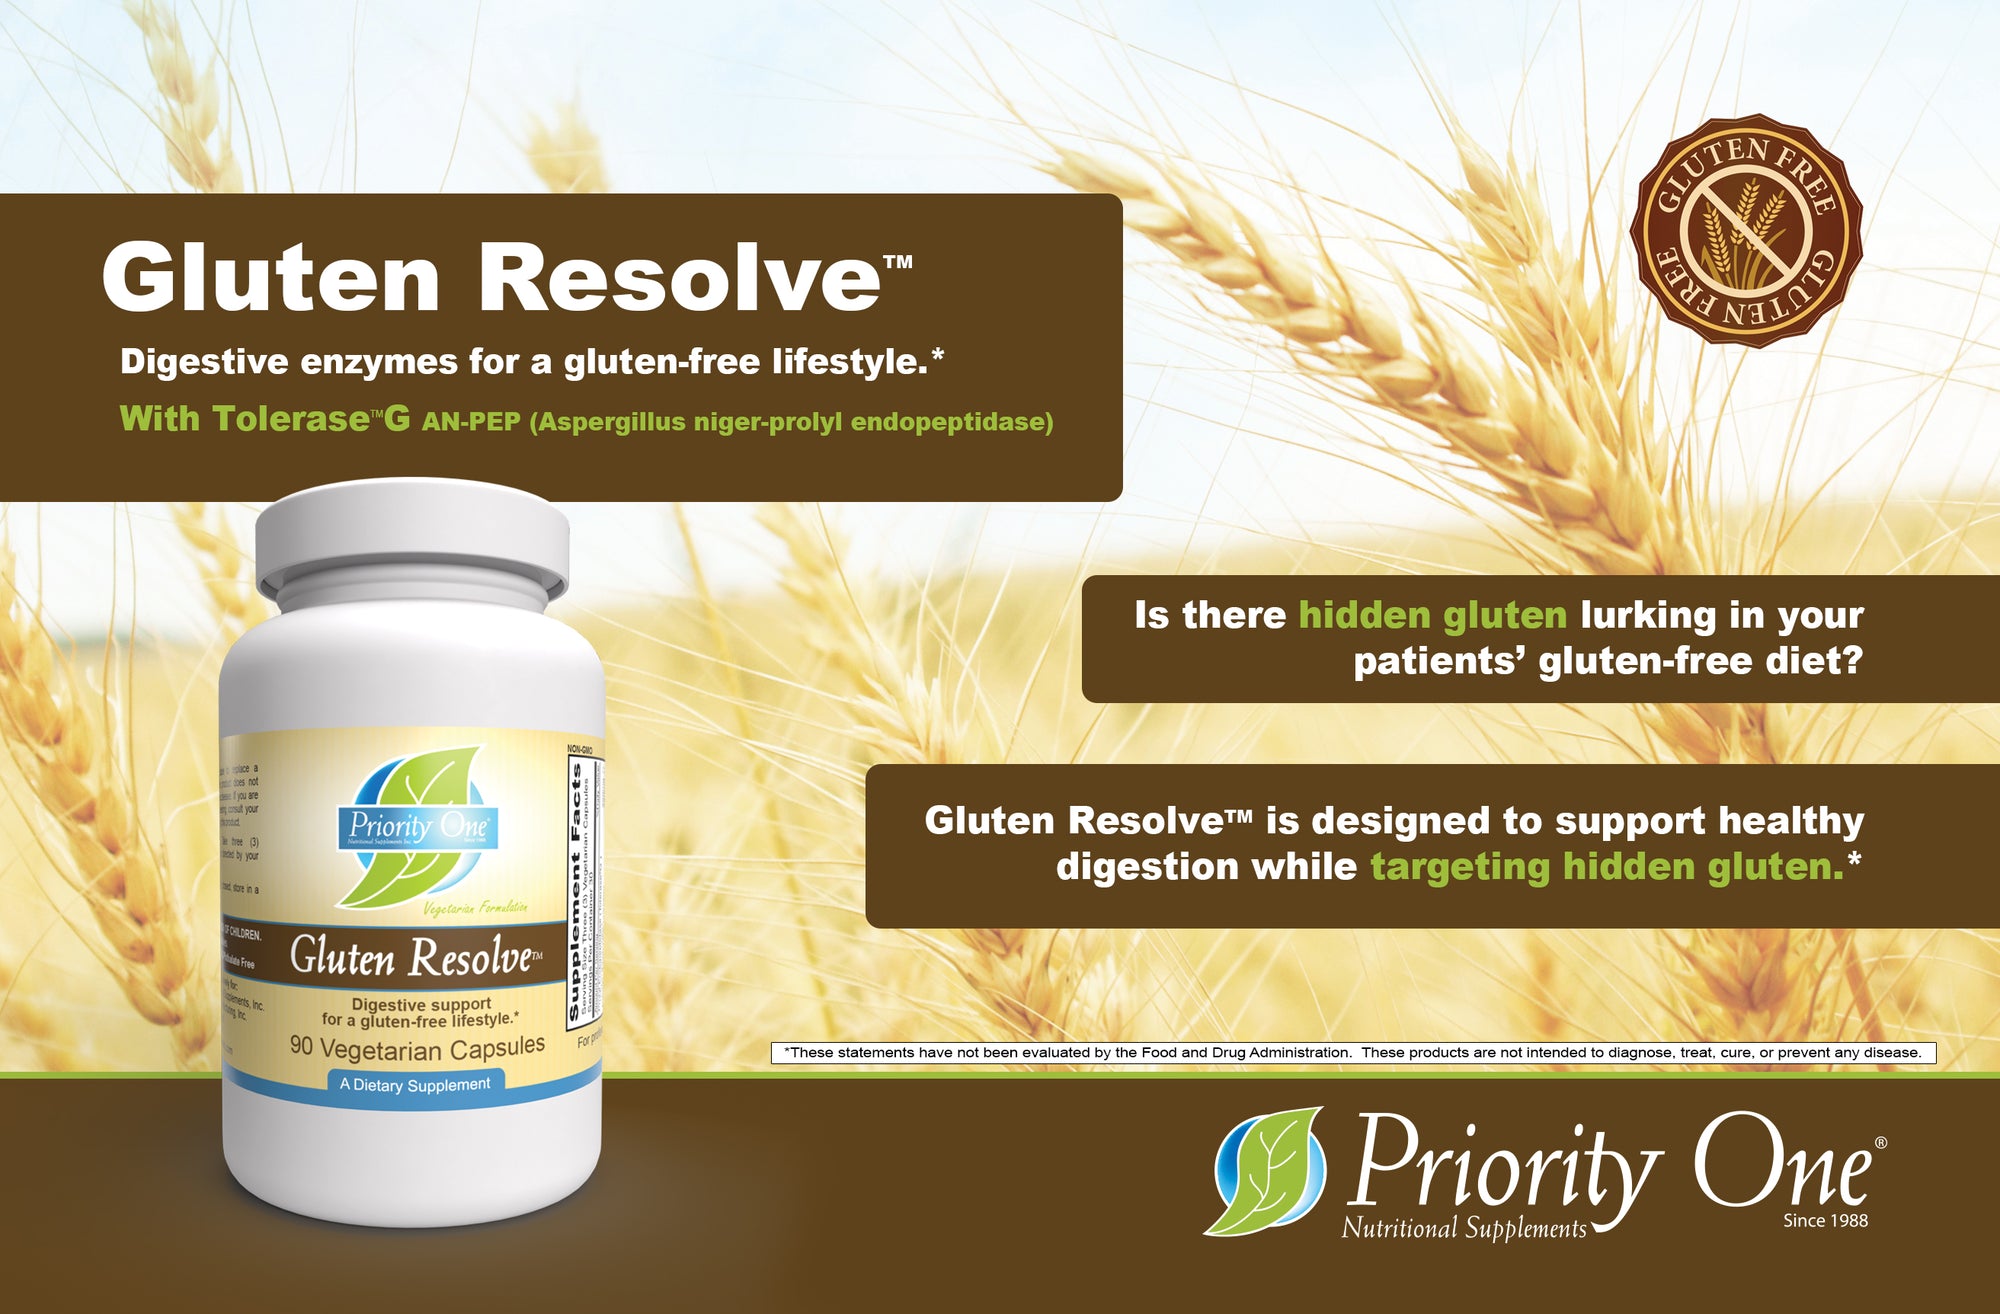 Gluten Resolve beneficial plant enzymes to support those living a gluten free lifestyle.*